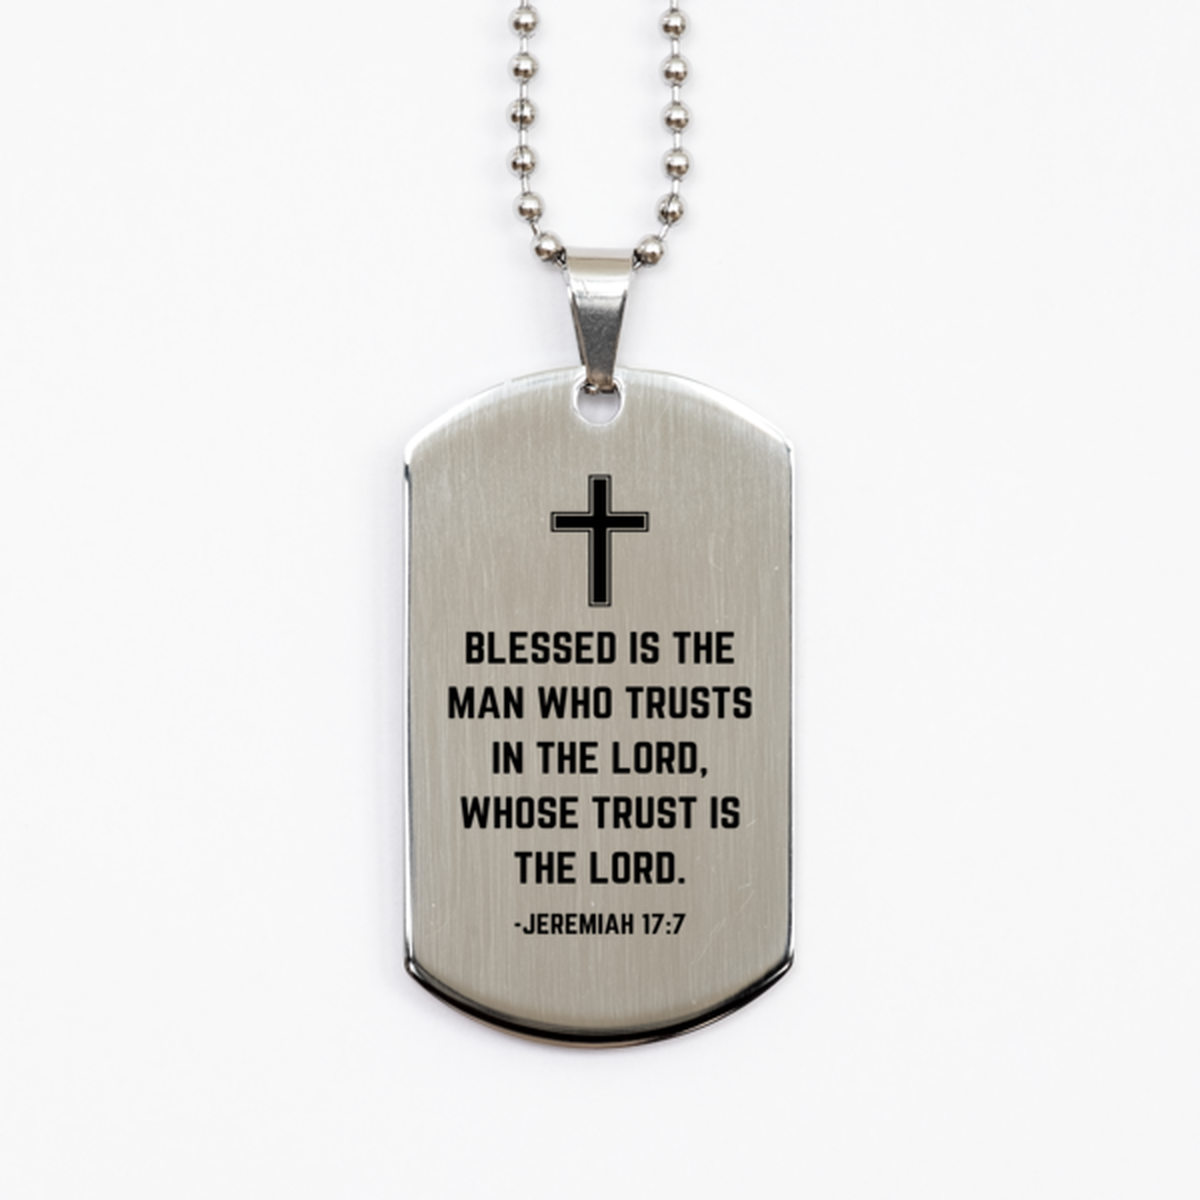 Baptism Gifts For Teenage Boys Girls, Christian Bible Verse Silver Dog Tag, Blessed is the man who trusts, Confirmation Gifts, Bible Verse Necklace for Son, Godson, Grandson, Nephew